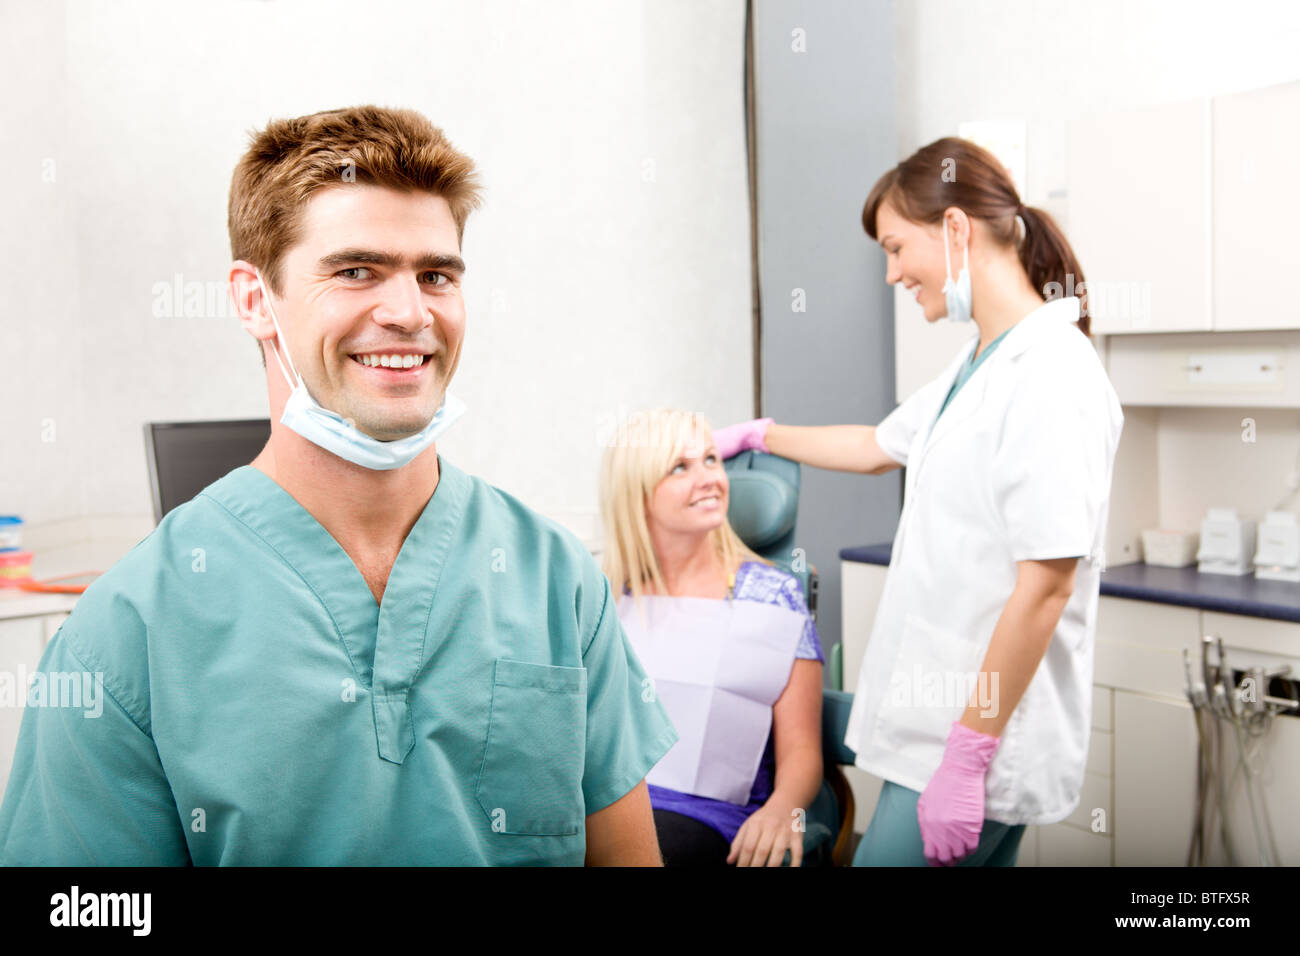 A happy smiling dentist at a clinic with an assistant and patient Stock Photo